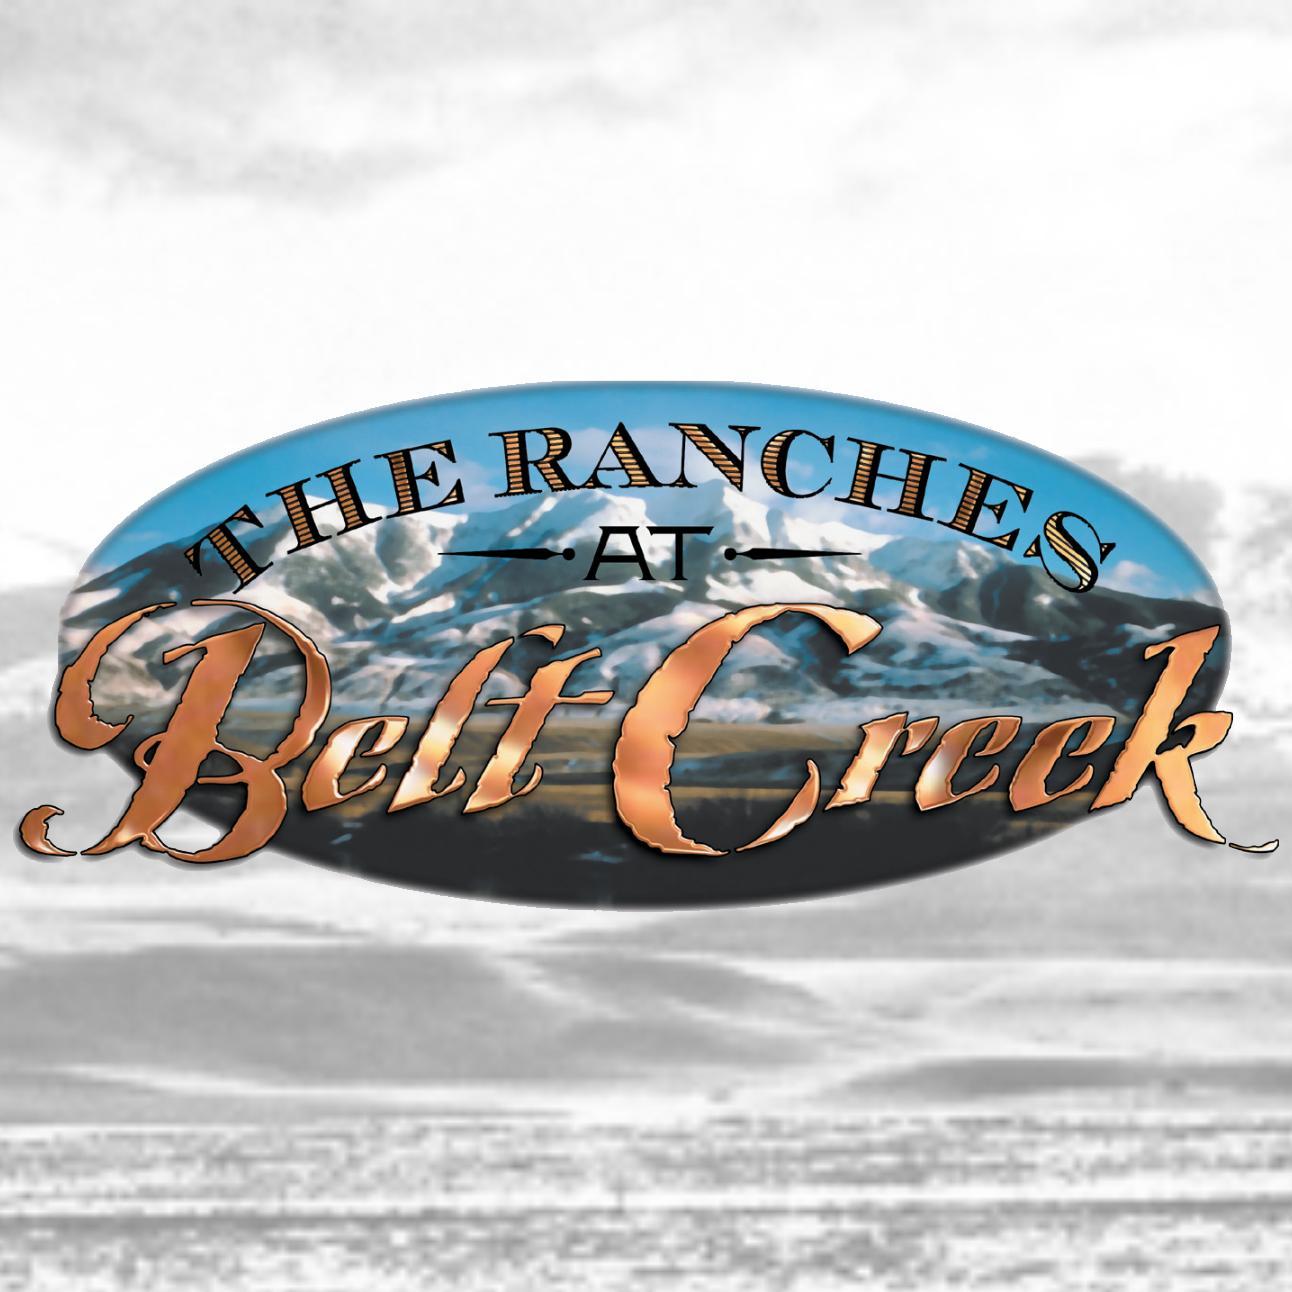 Legacy, Luxury, Adventure. Own a beautiful Montana ranch or come vacation at our luxury ranch resorts #ranch #montana